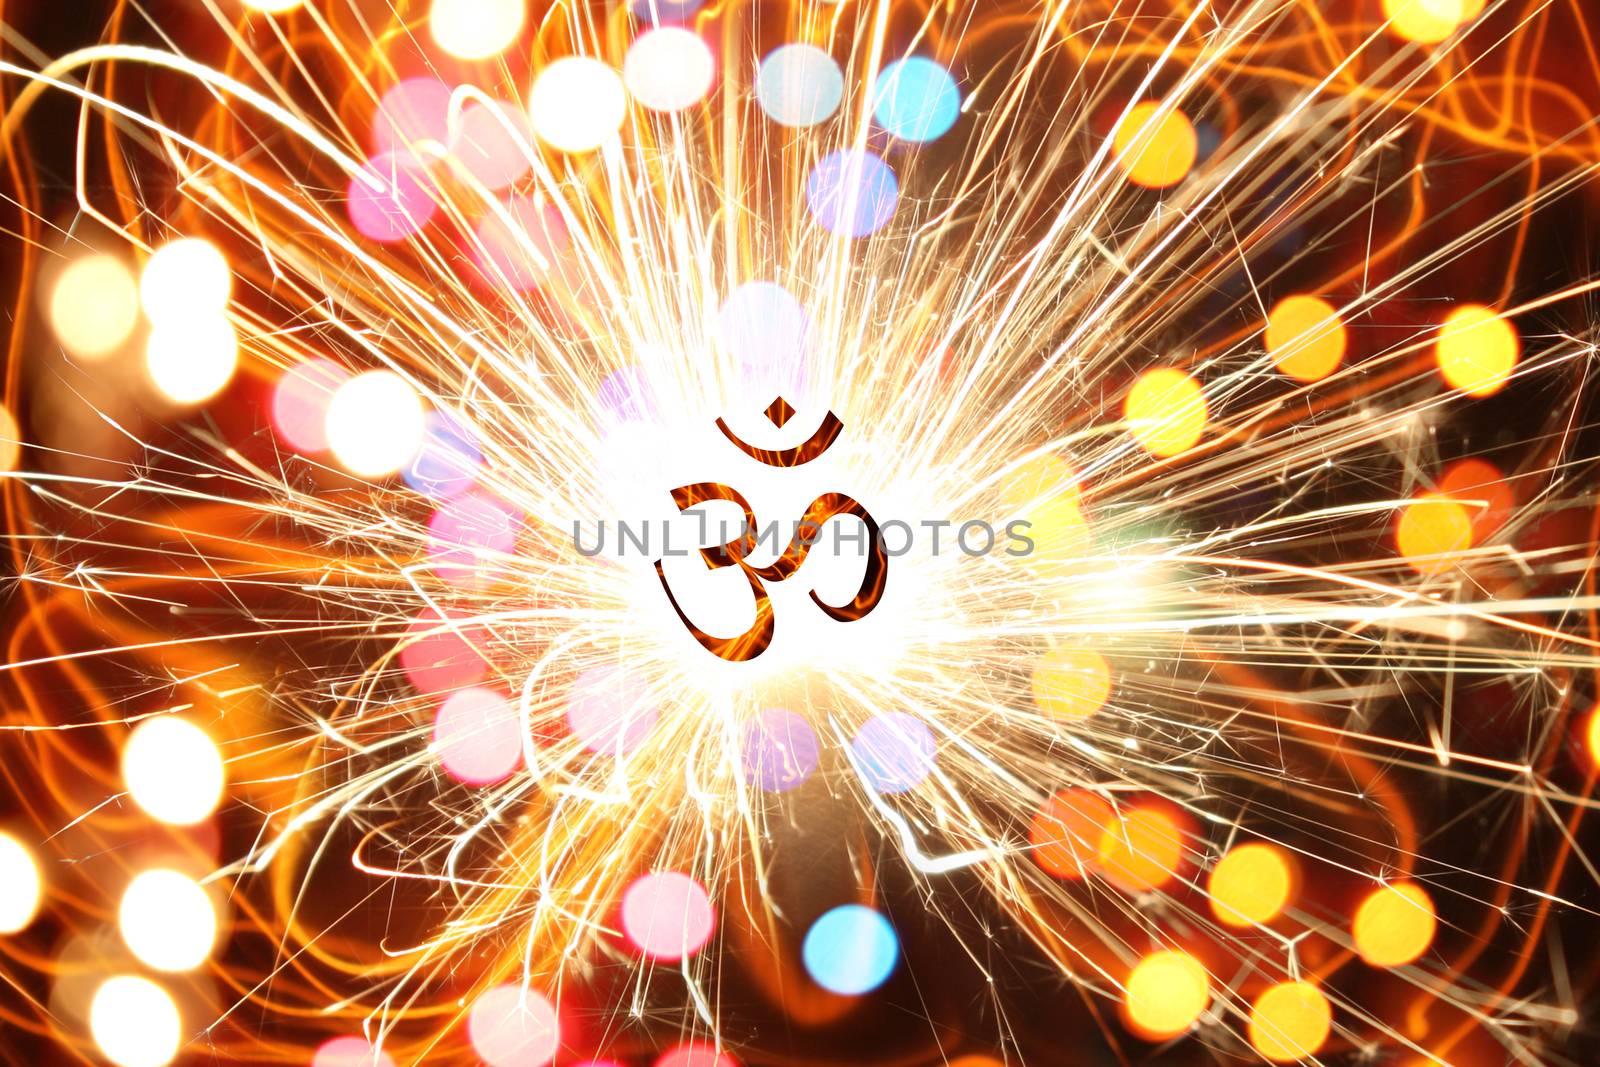 An abstract art showing the enerigies and powers around the Hindu Symbol OM, depicting healing, spiritual or religious energies.